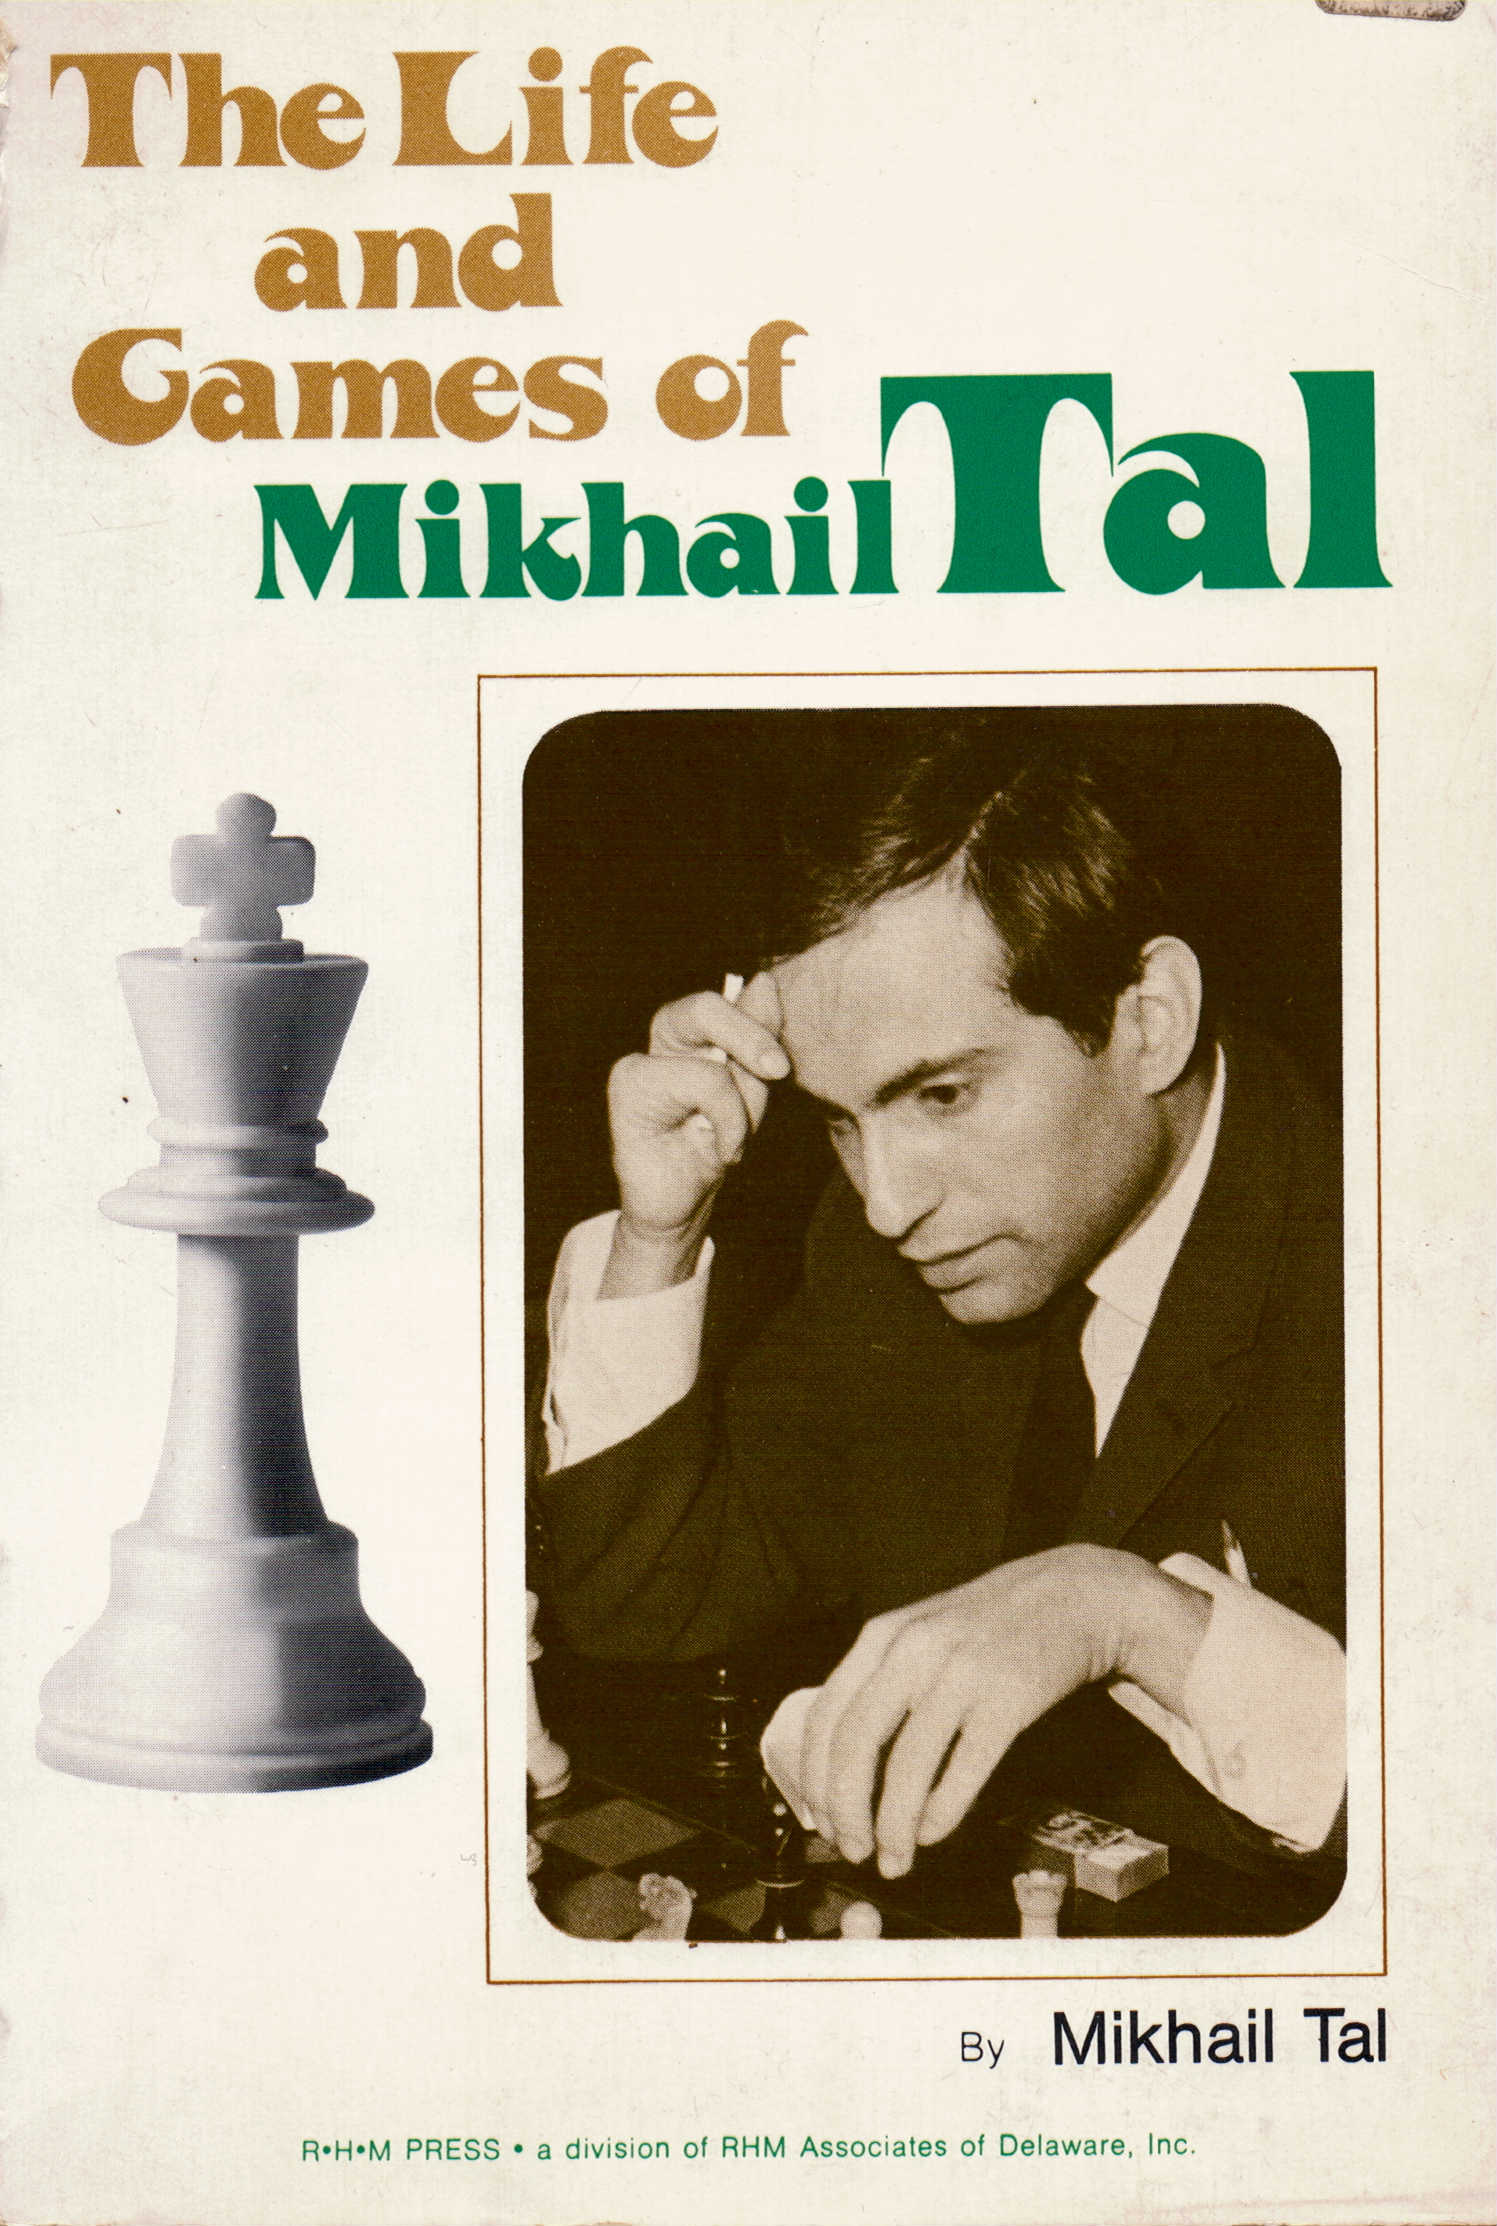 Too Much Complications in Mikhail Tal Game